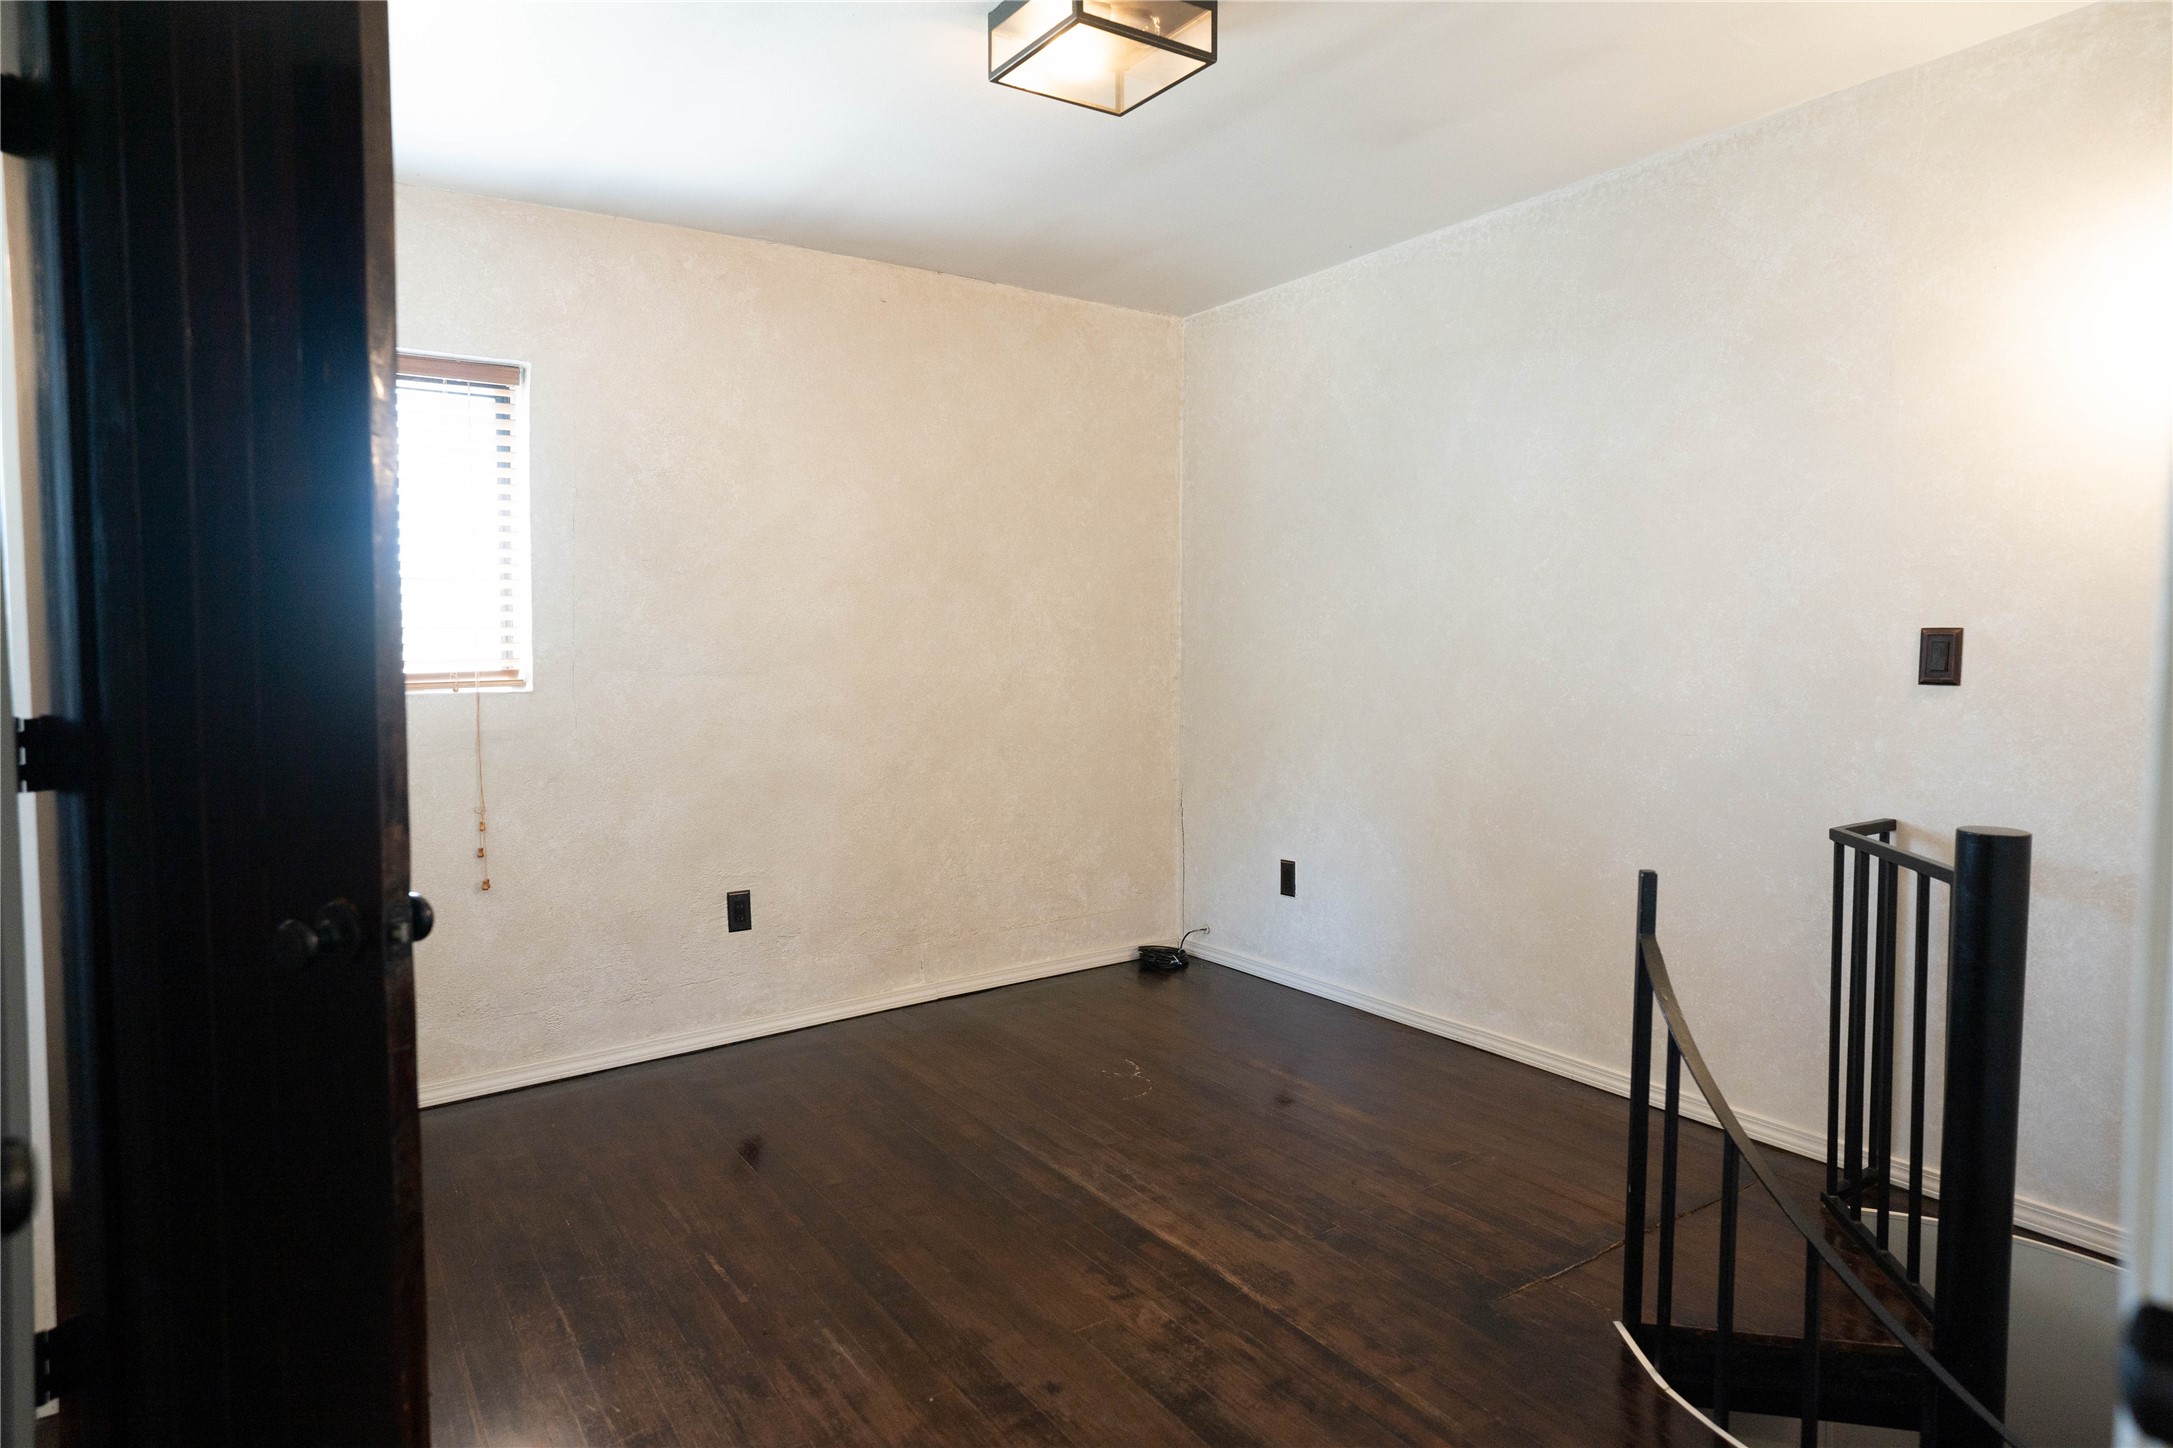 506 S Pacific, Las Vegas, New Mexico 87701, 2 Bedrooms Bedrooms, ,1 BathroomBathrooms,Residential,For Sale,506 S Pacific,202233020